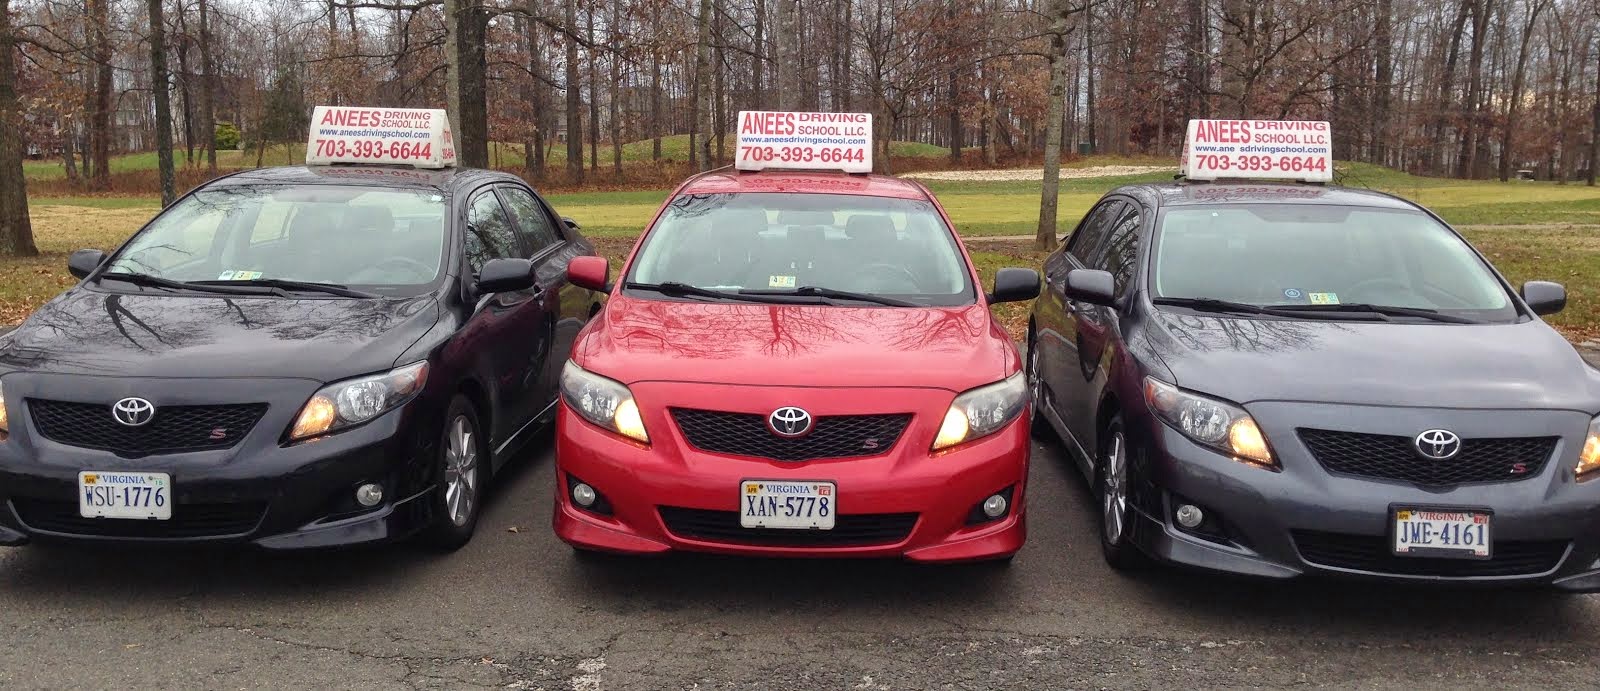 Professional Driving School for Teens and Adults Northern Virginia